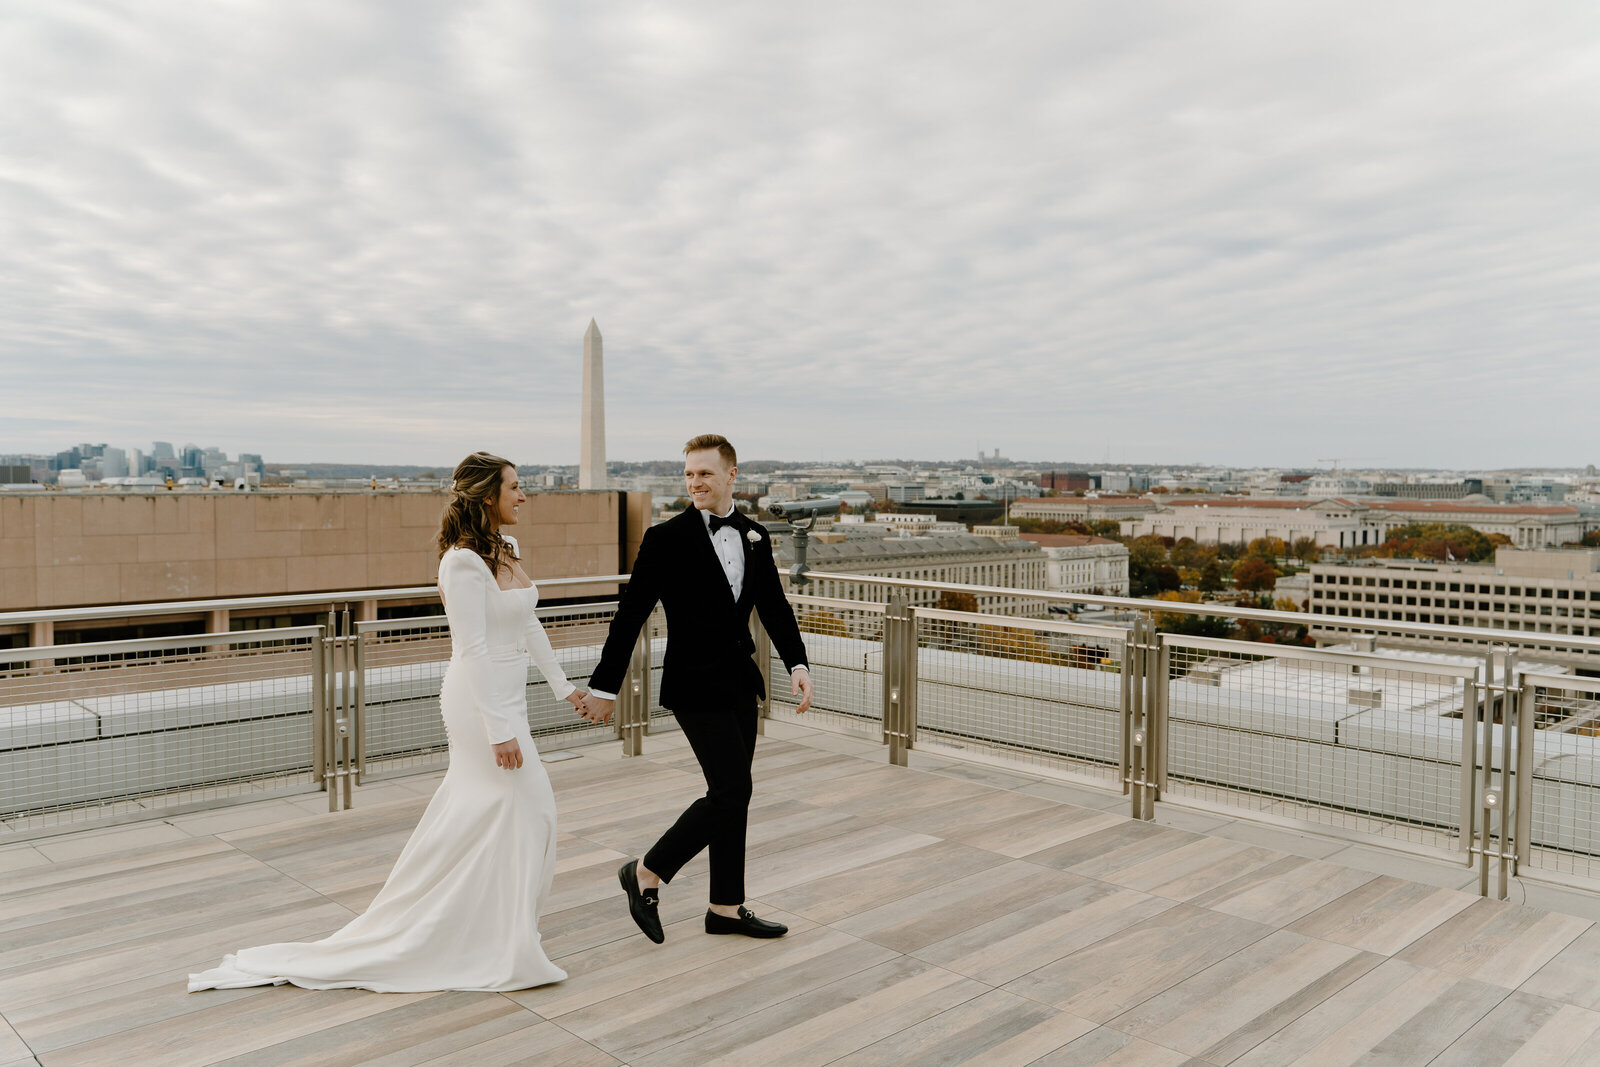 Dreamy Washington D.C rooftop wedding photography with a black and white James Bond style